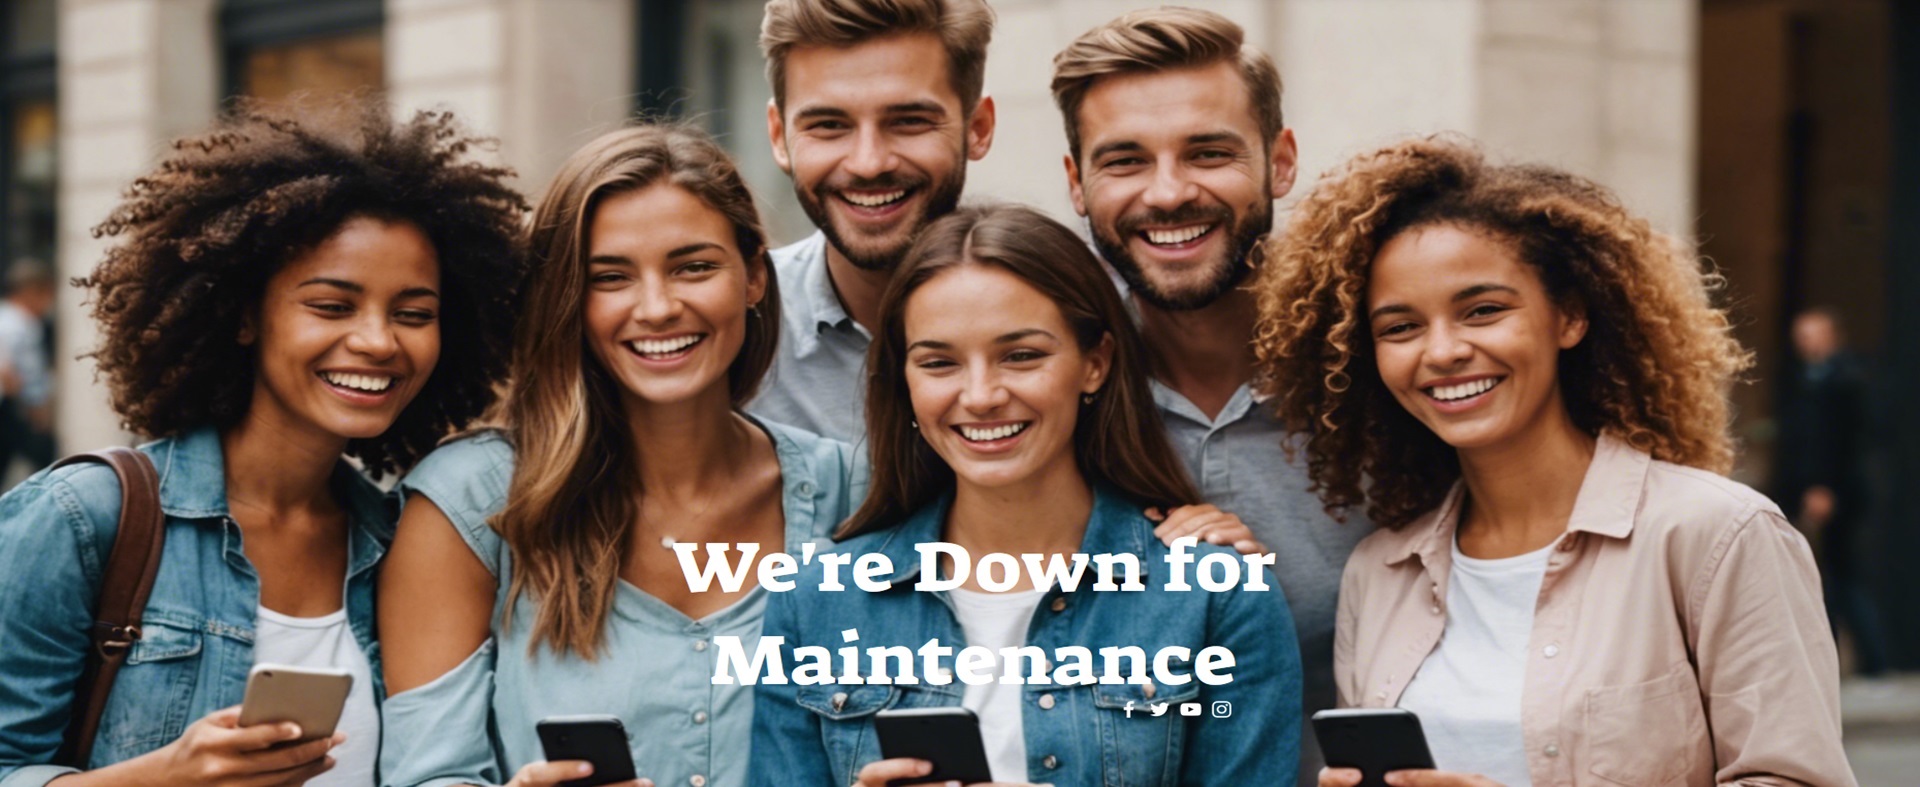 Sorry, we are closed for maintenance